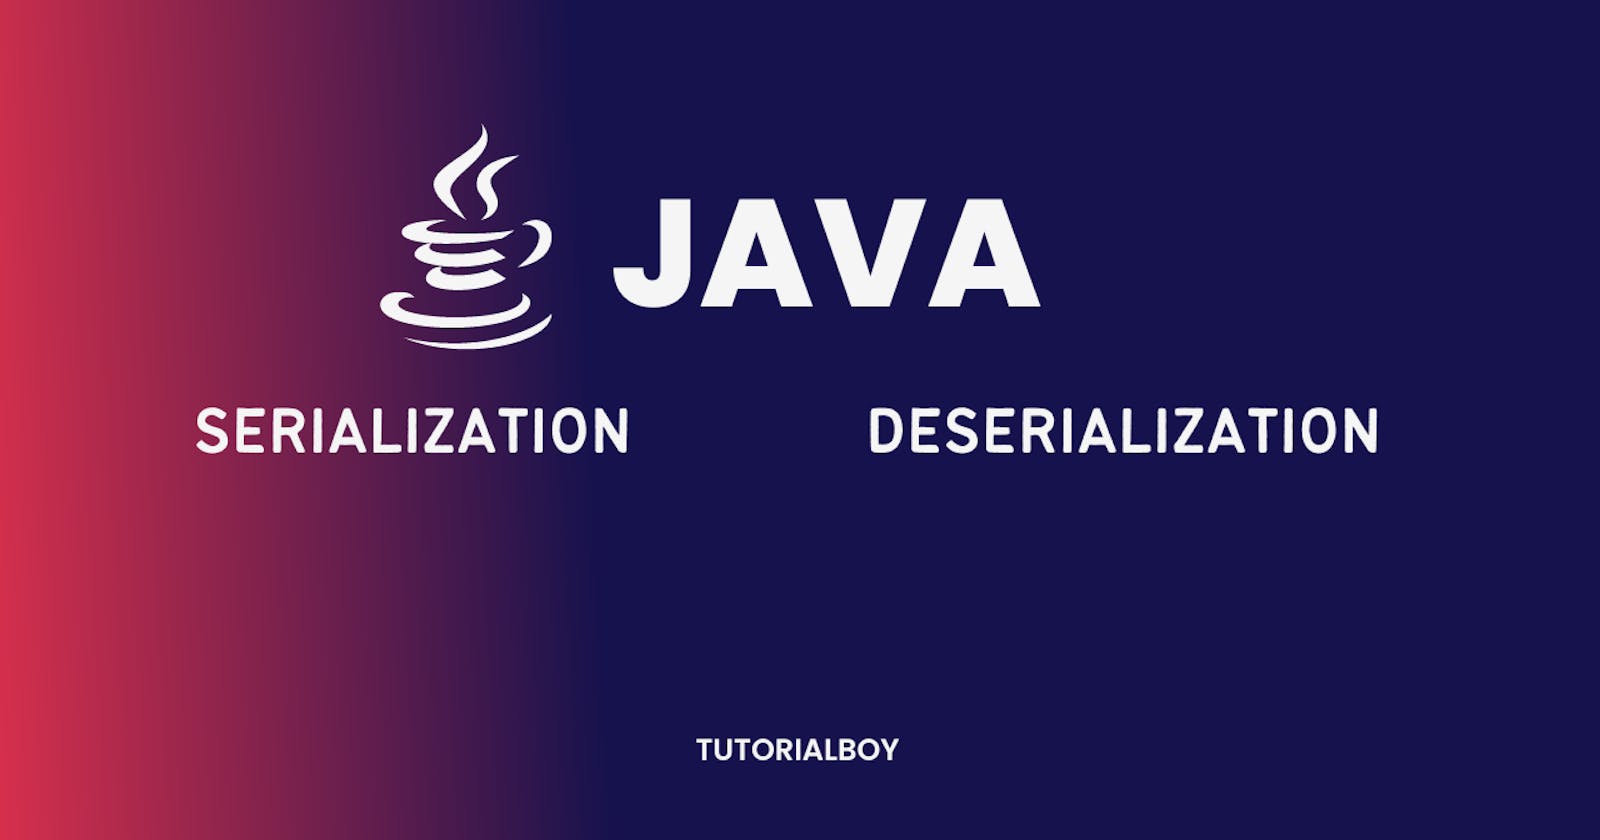 A Talk About Java Serialization and Deserialization